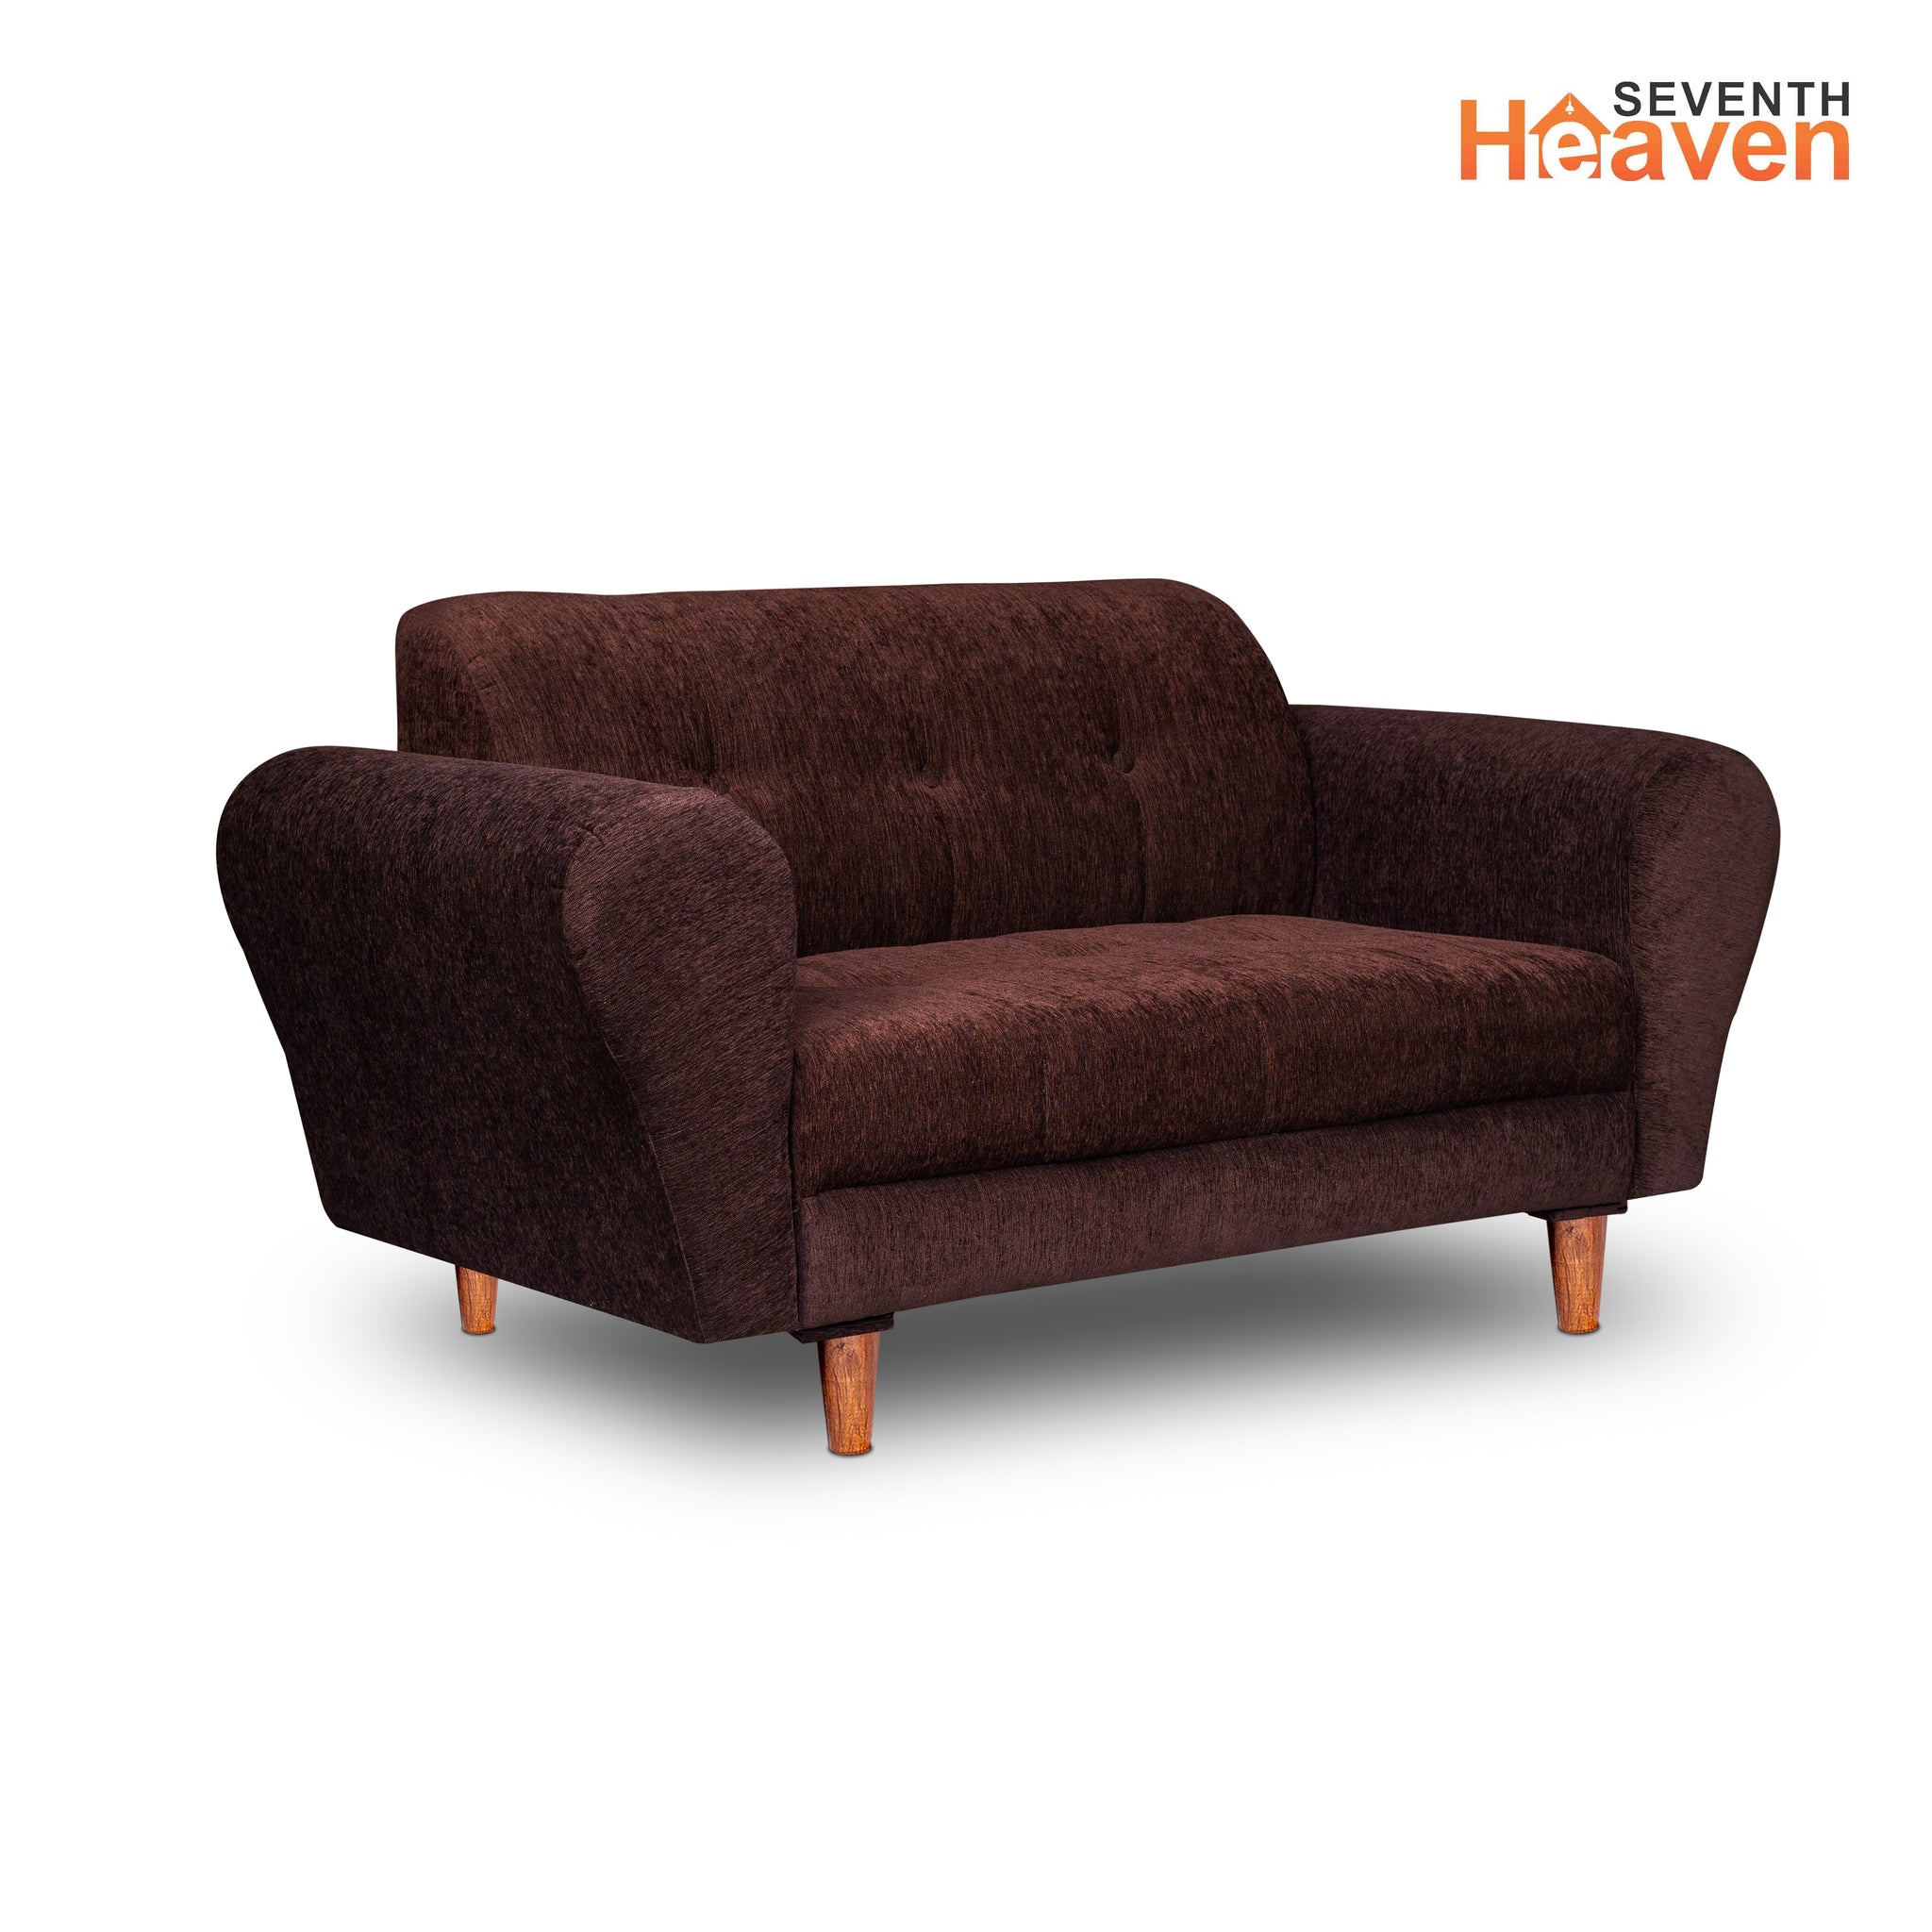 Seventh Heaven Milan 2 Seater Wooden Sofa Set Modern & Elegant Smart Furniture Range for luxurious homes, living rooms and offices. Brown Colour Molphino fabric with sheesham polished wooden legs.